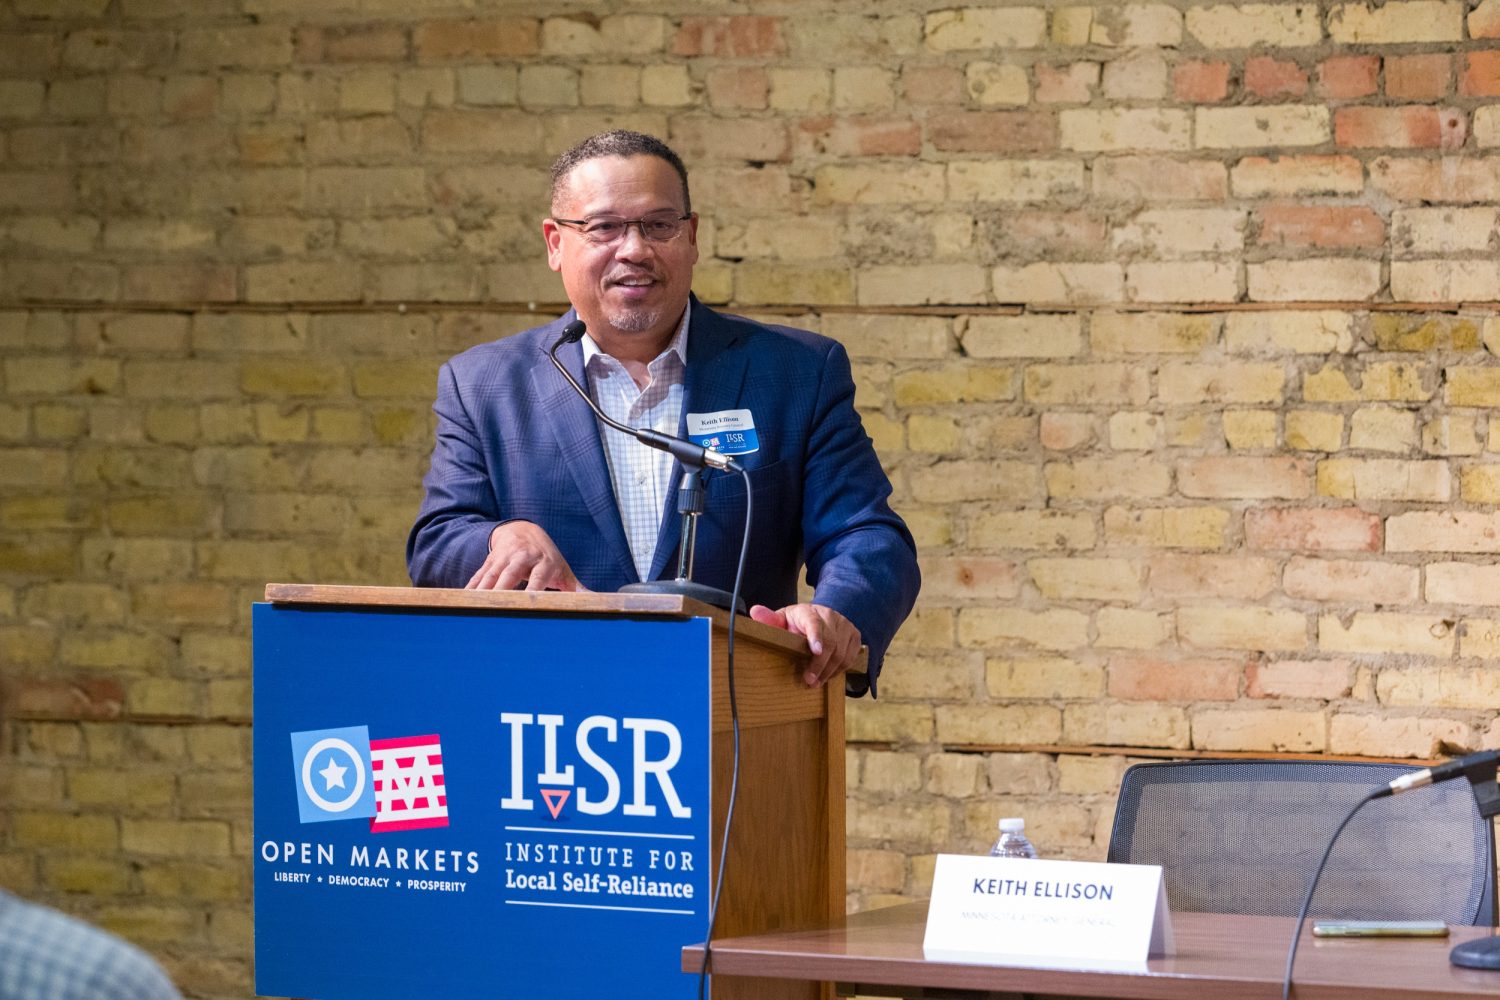 Midwest Forum on Fair Markets hosted by the Institute for Local Self-Reliance and Open Markets Institute. https://ilsr.org/midwest-forum-on-fair-markets/… Read More